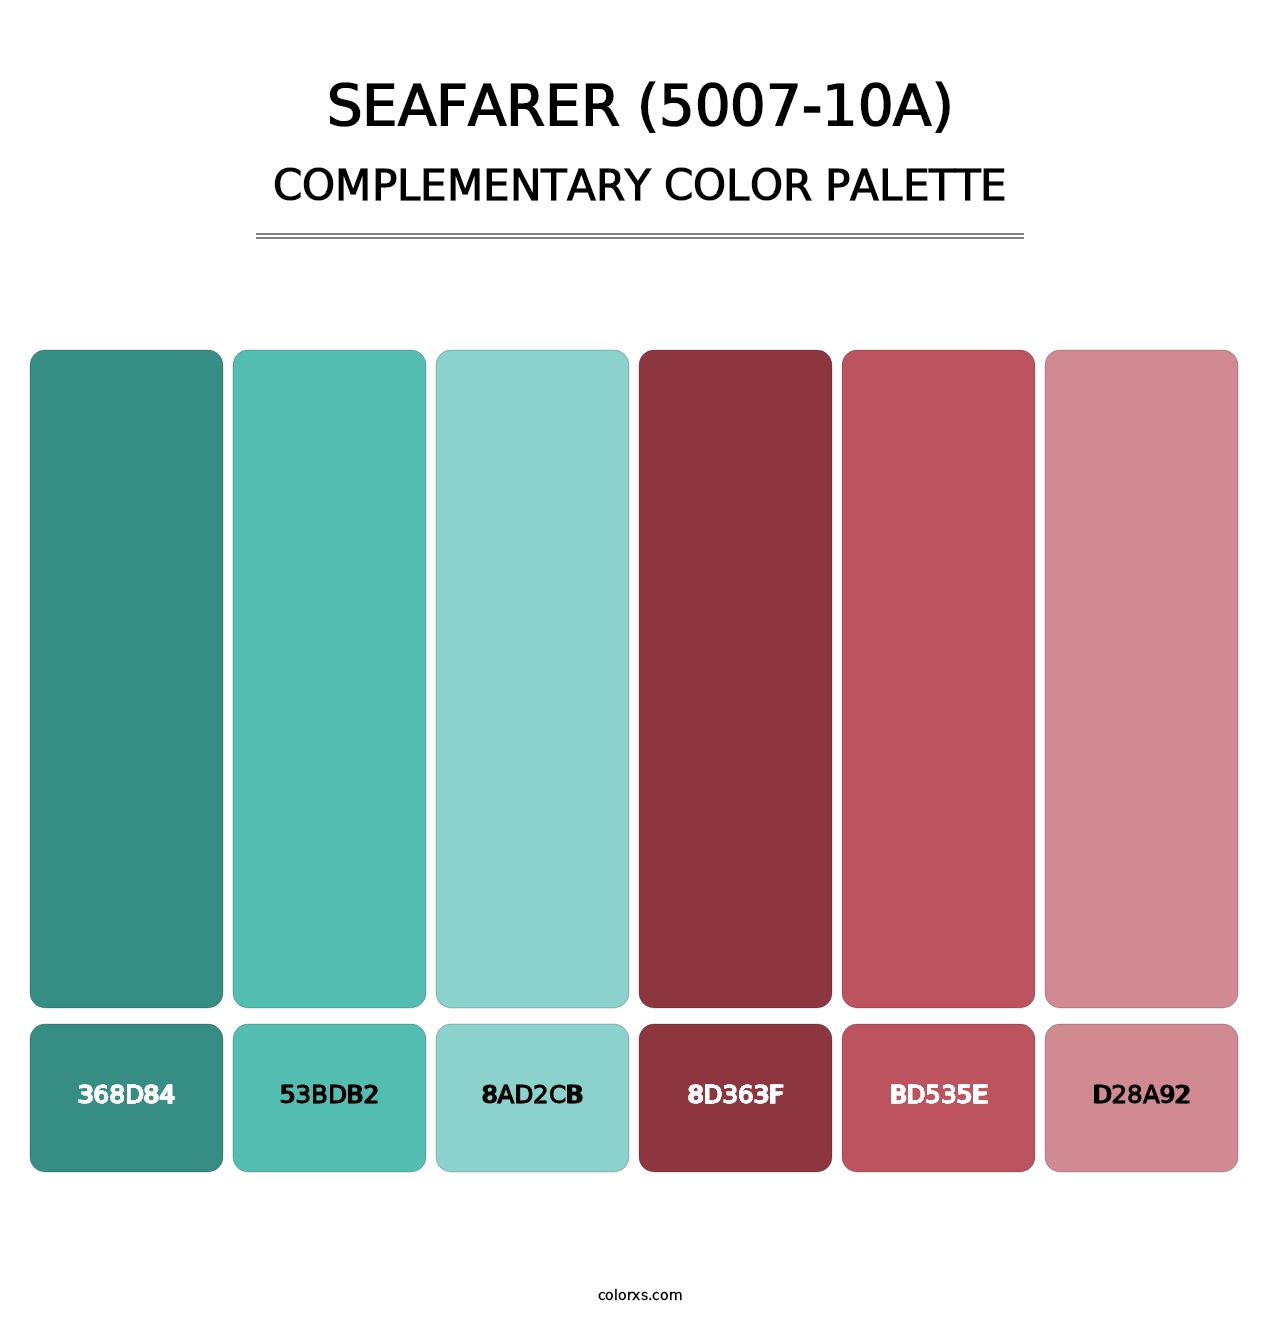 Seafarer (5007-10A) - Complementary Color Palette